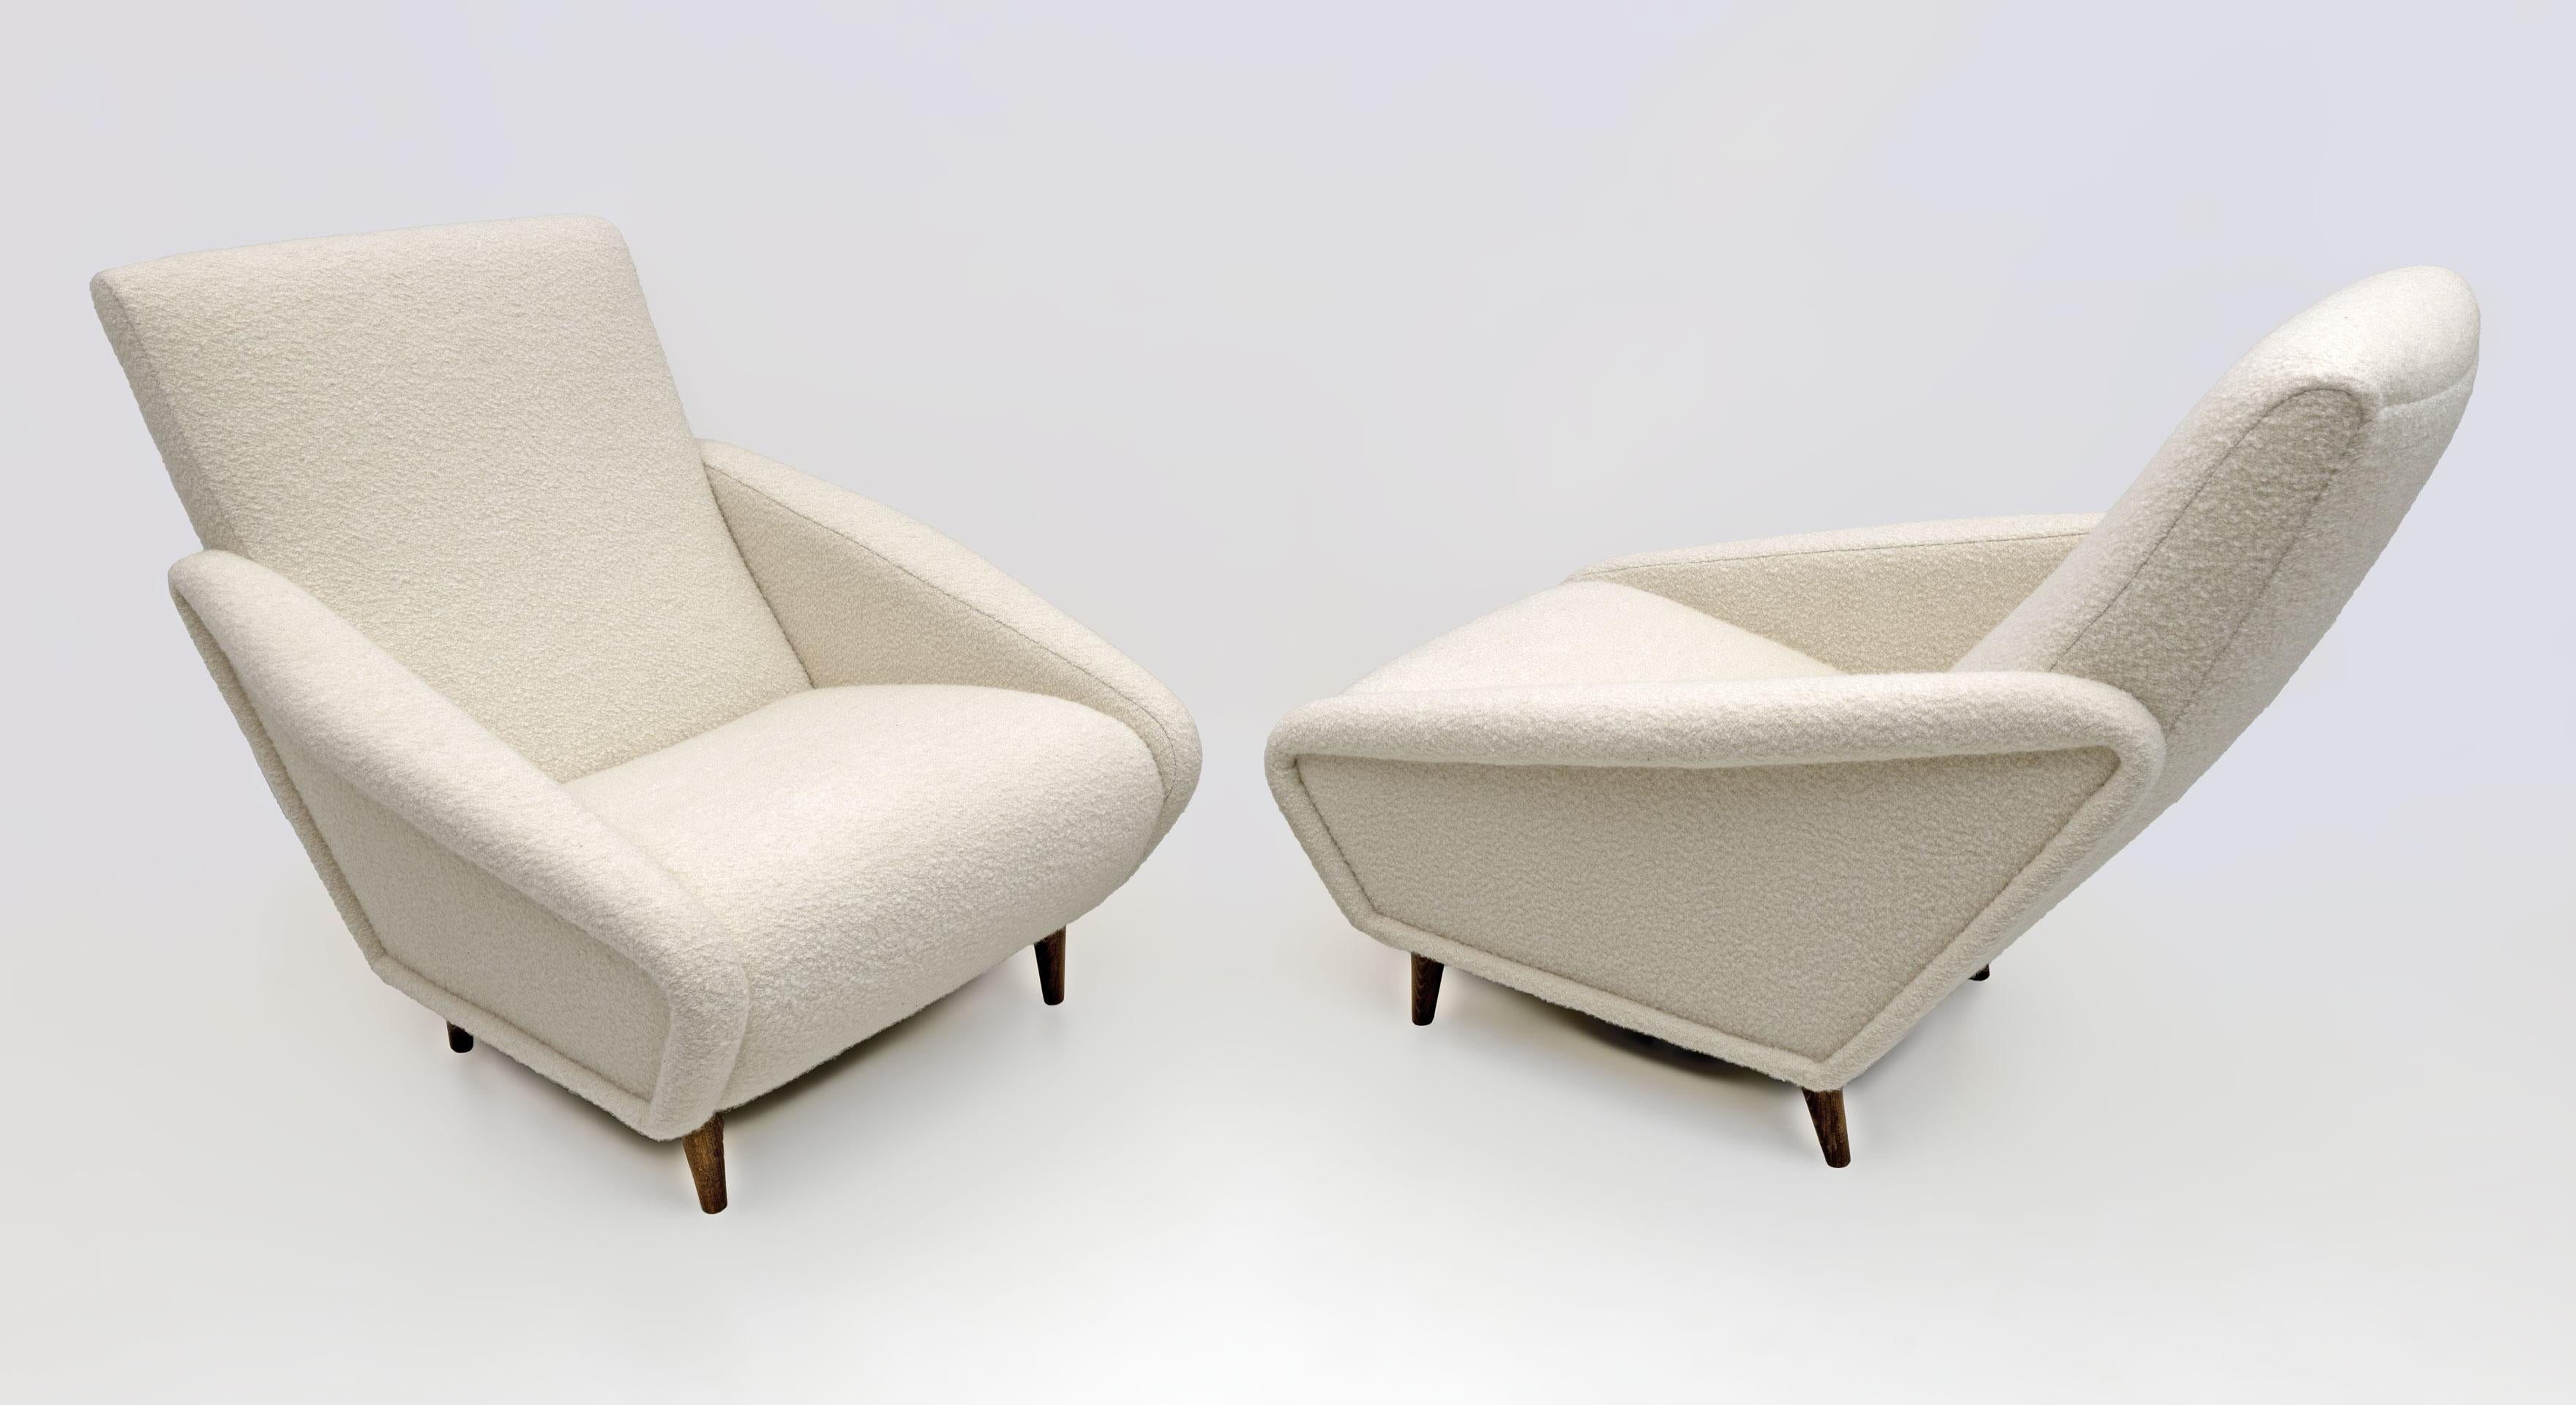 Pair of Mid-Century Modern Italian Armchairs Distex 807 by Gio Ponti In Good Condition For Sale In Puglia, Puglia